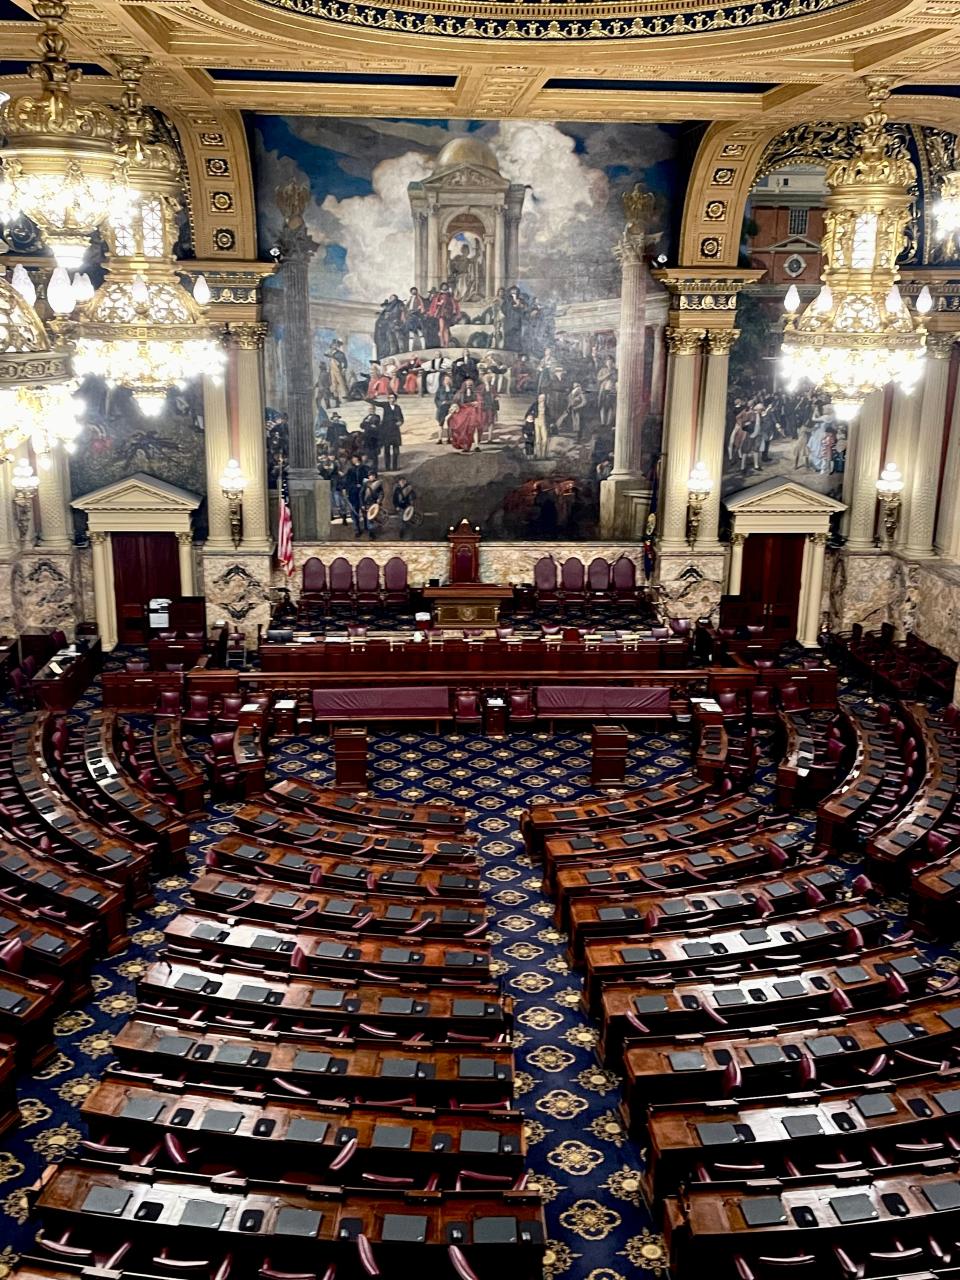 The large mural "The Apotheosis of Pennsylvania" is located directly behind the house speaker's podium.